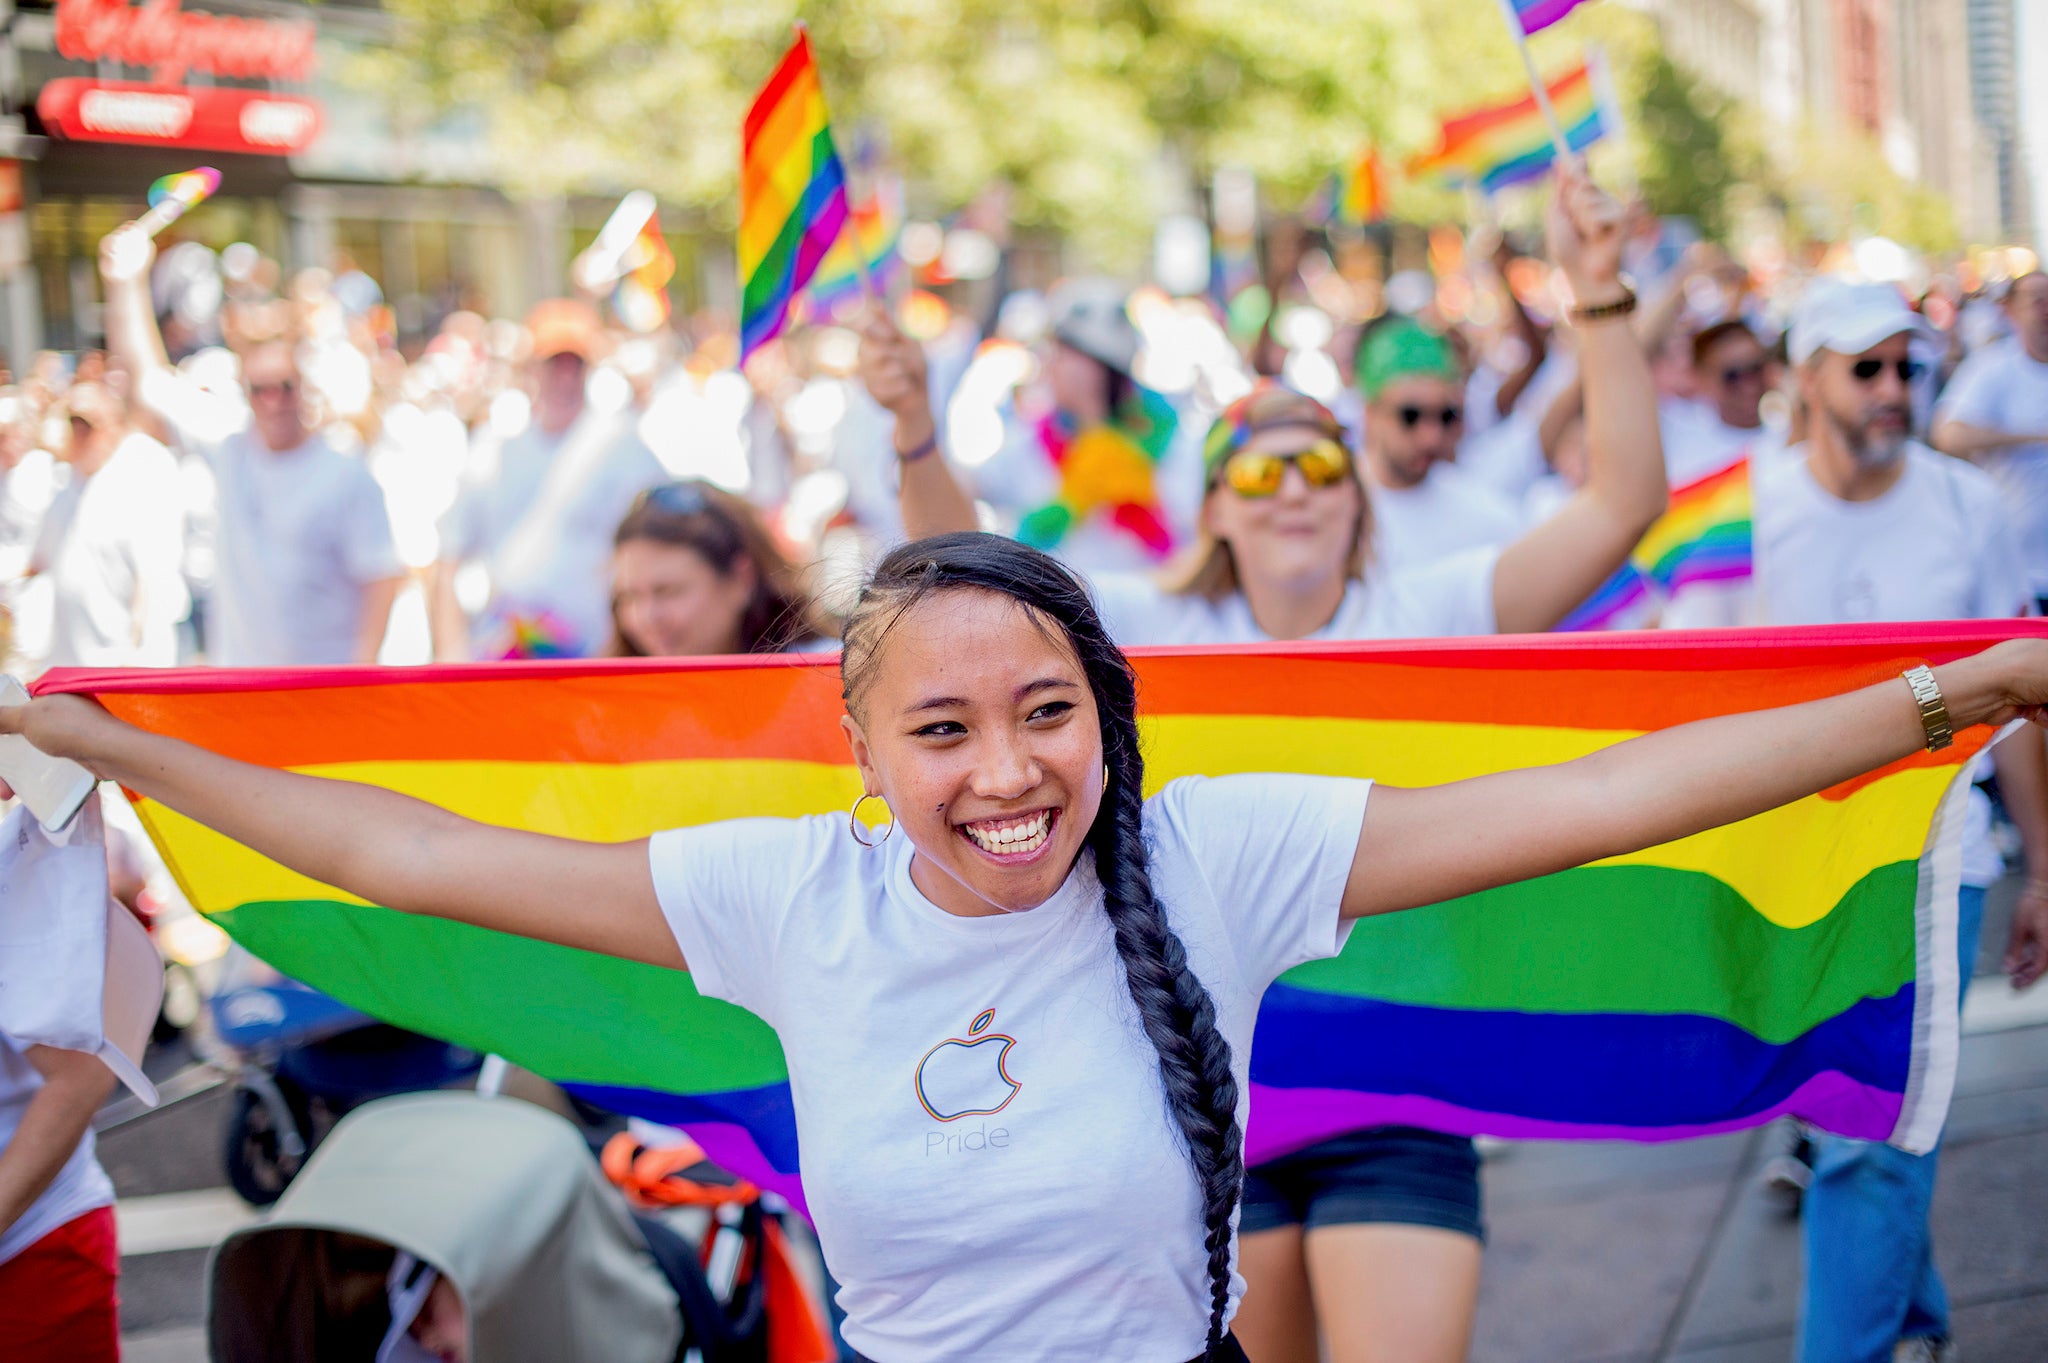 Apple retail employee Minh Phan marches in the San Francisco Gay Pride Festival in California June 29, 2014